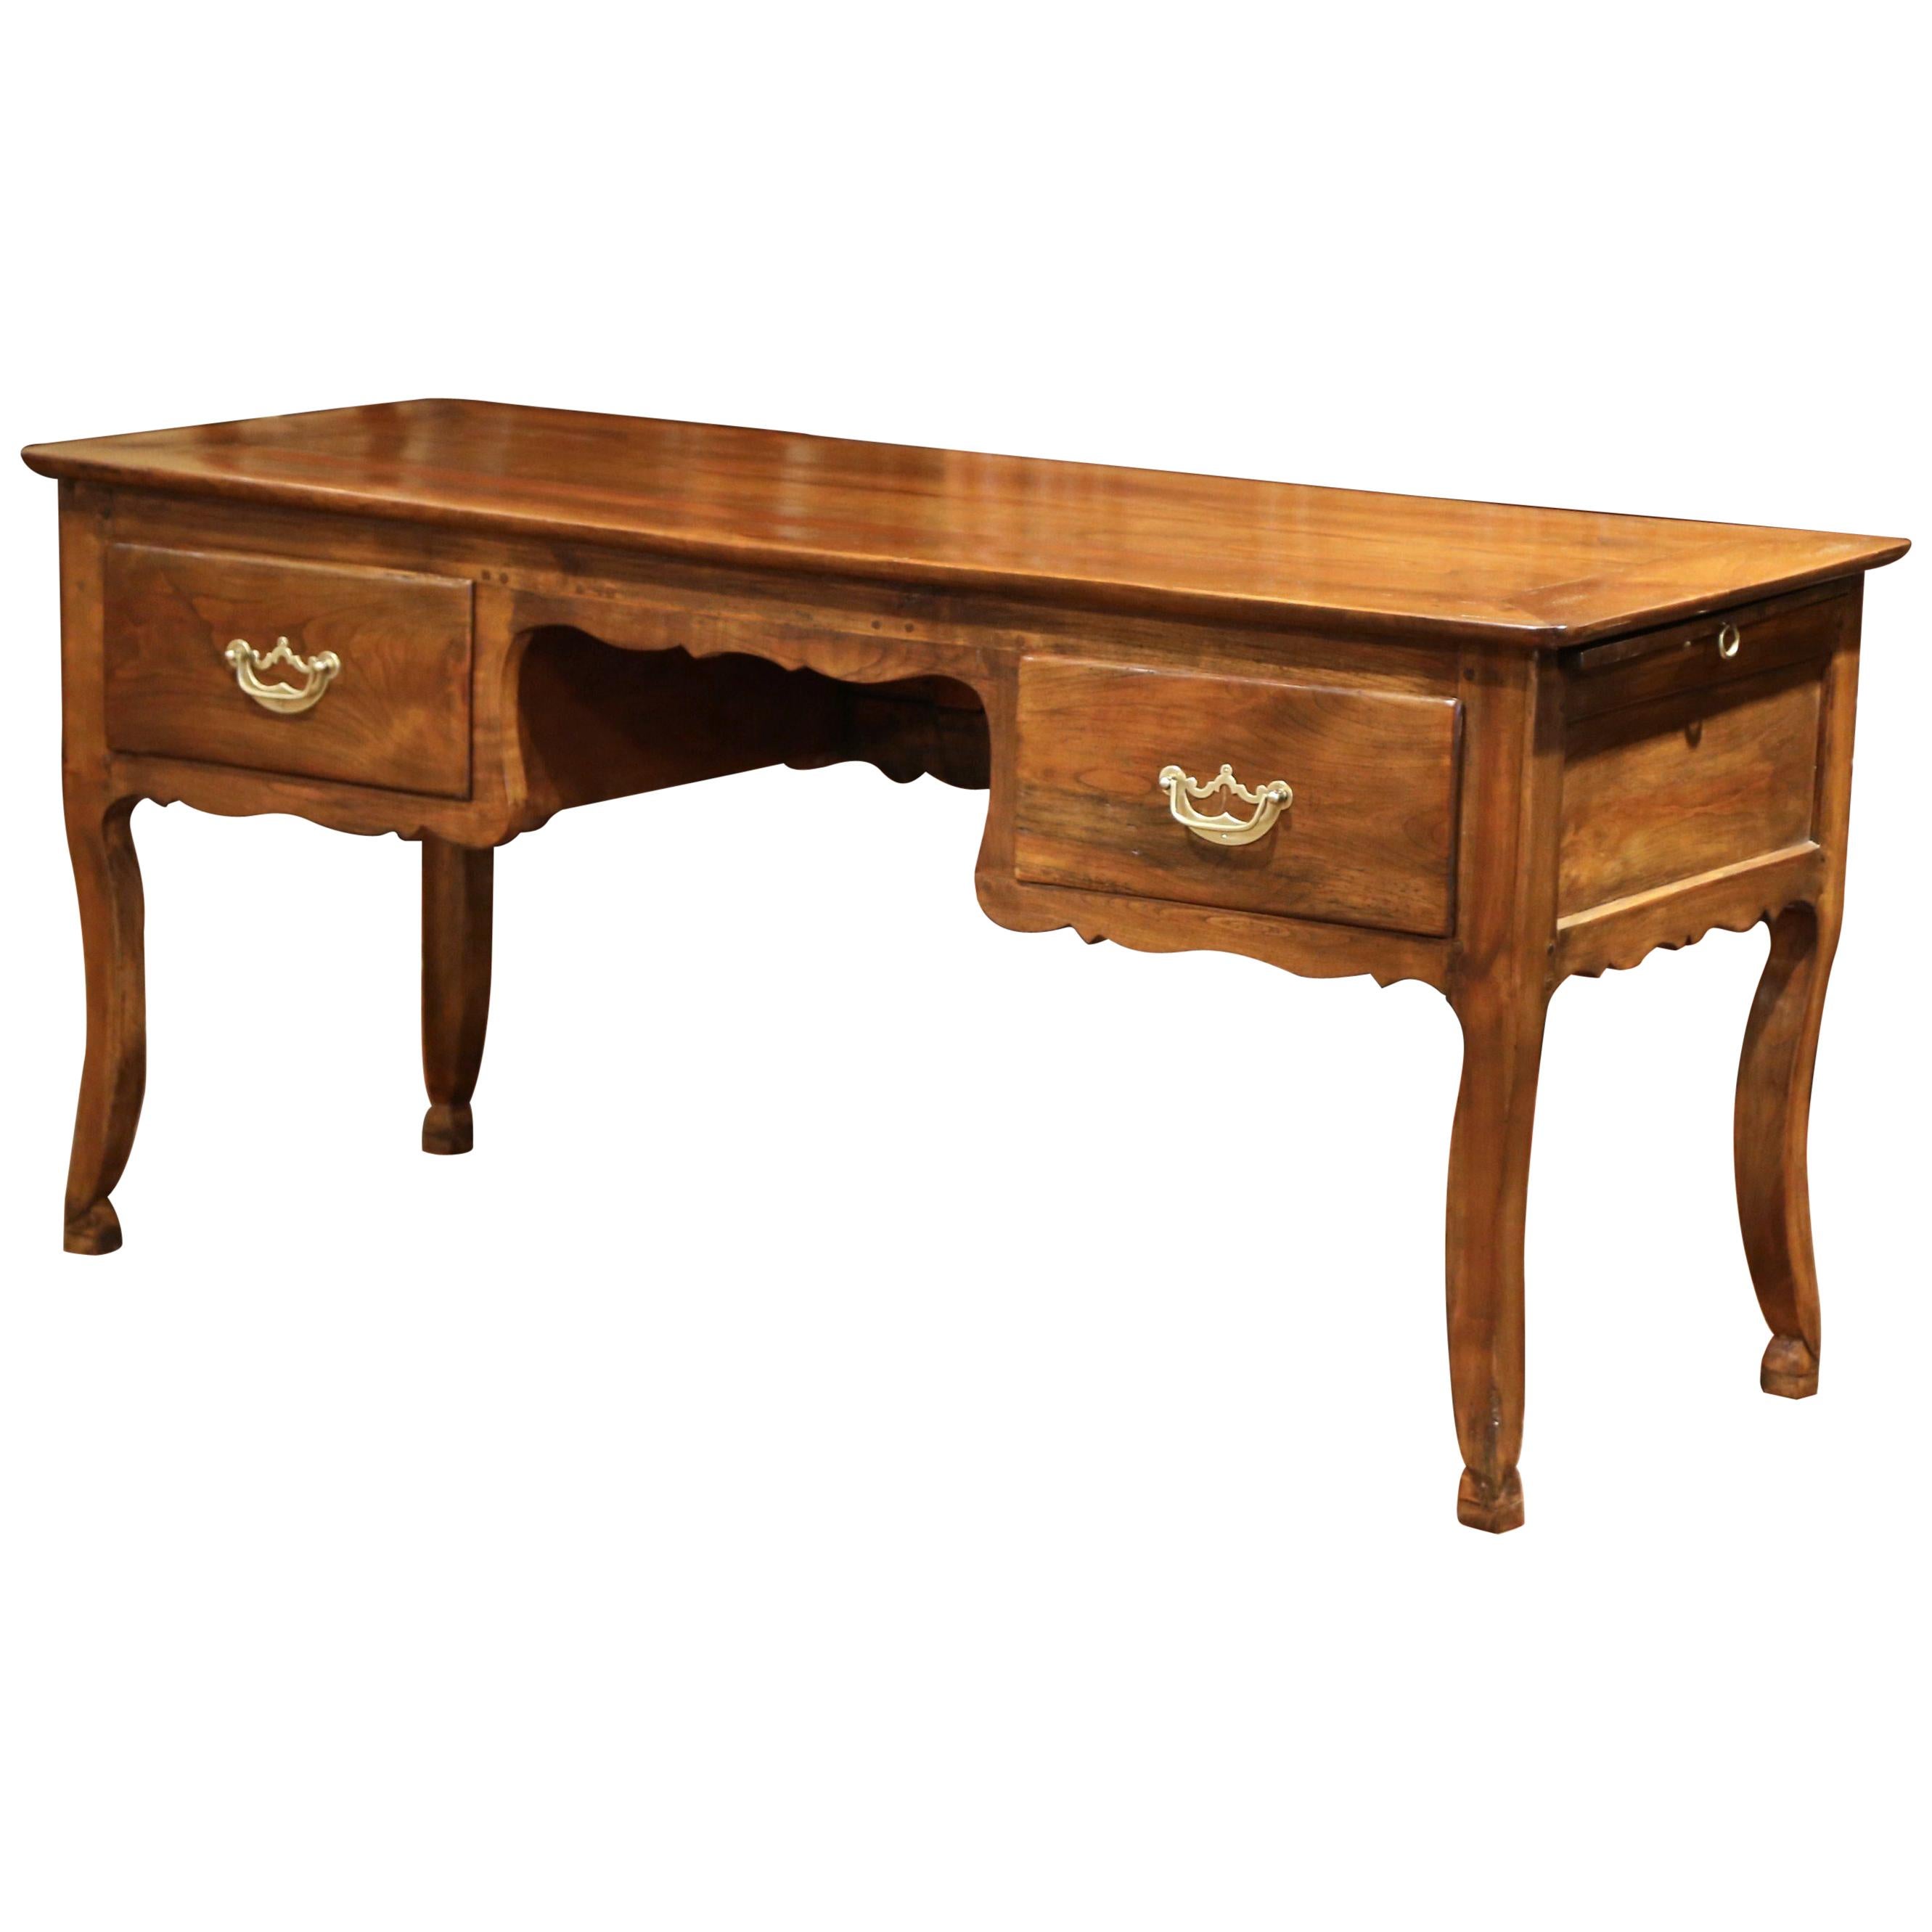 19th Century French Louis XV Carved Cherry Desk with Drawers and Pull Out Trays